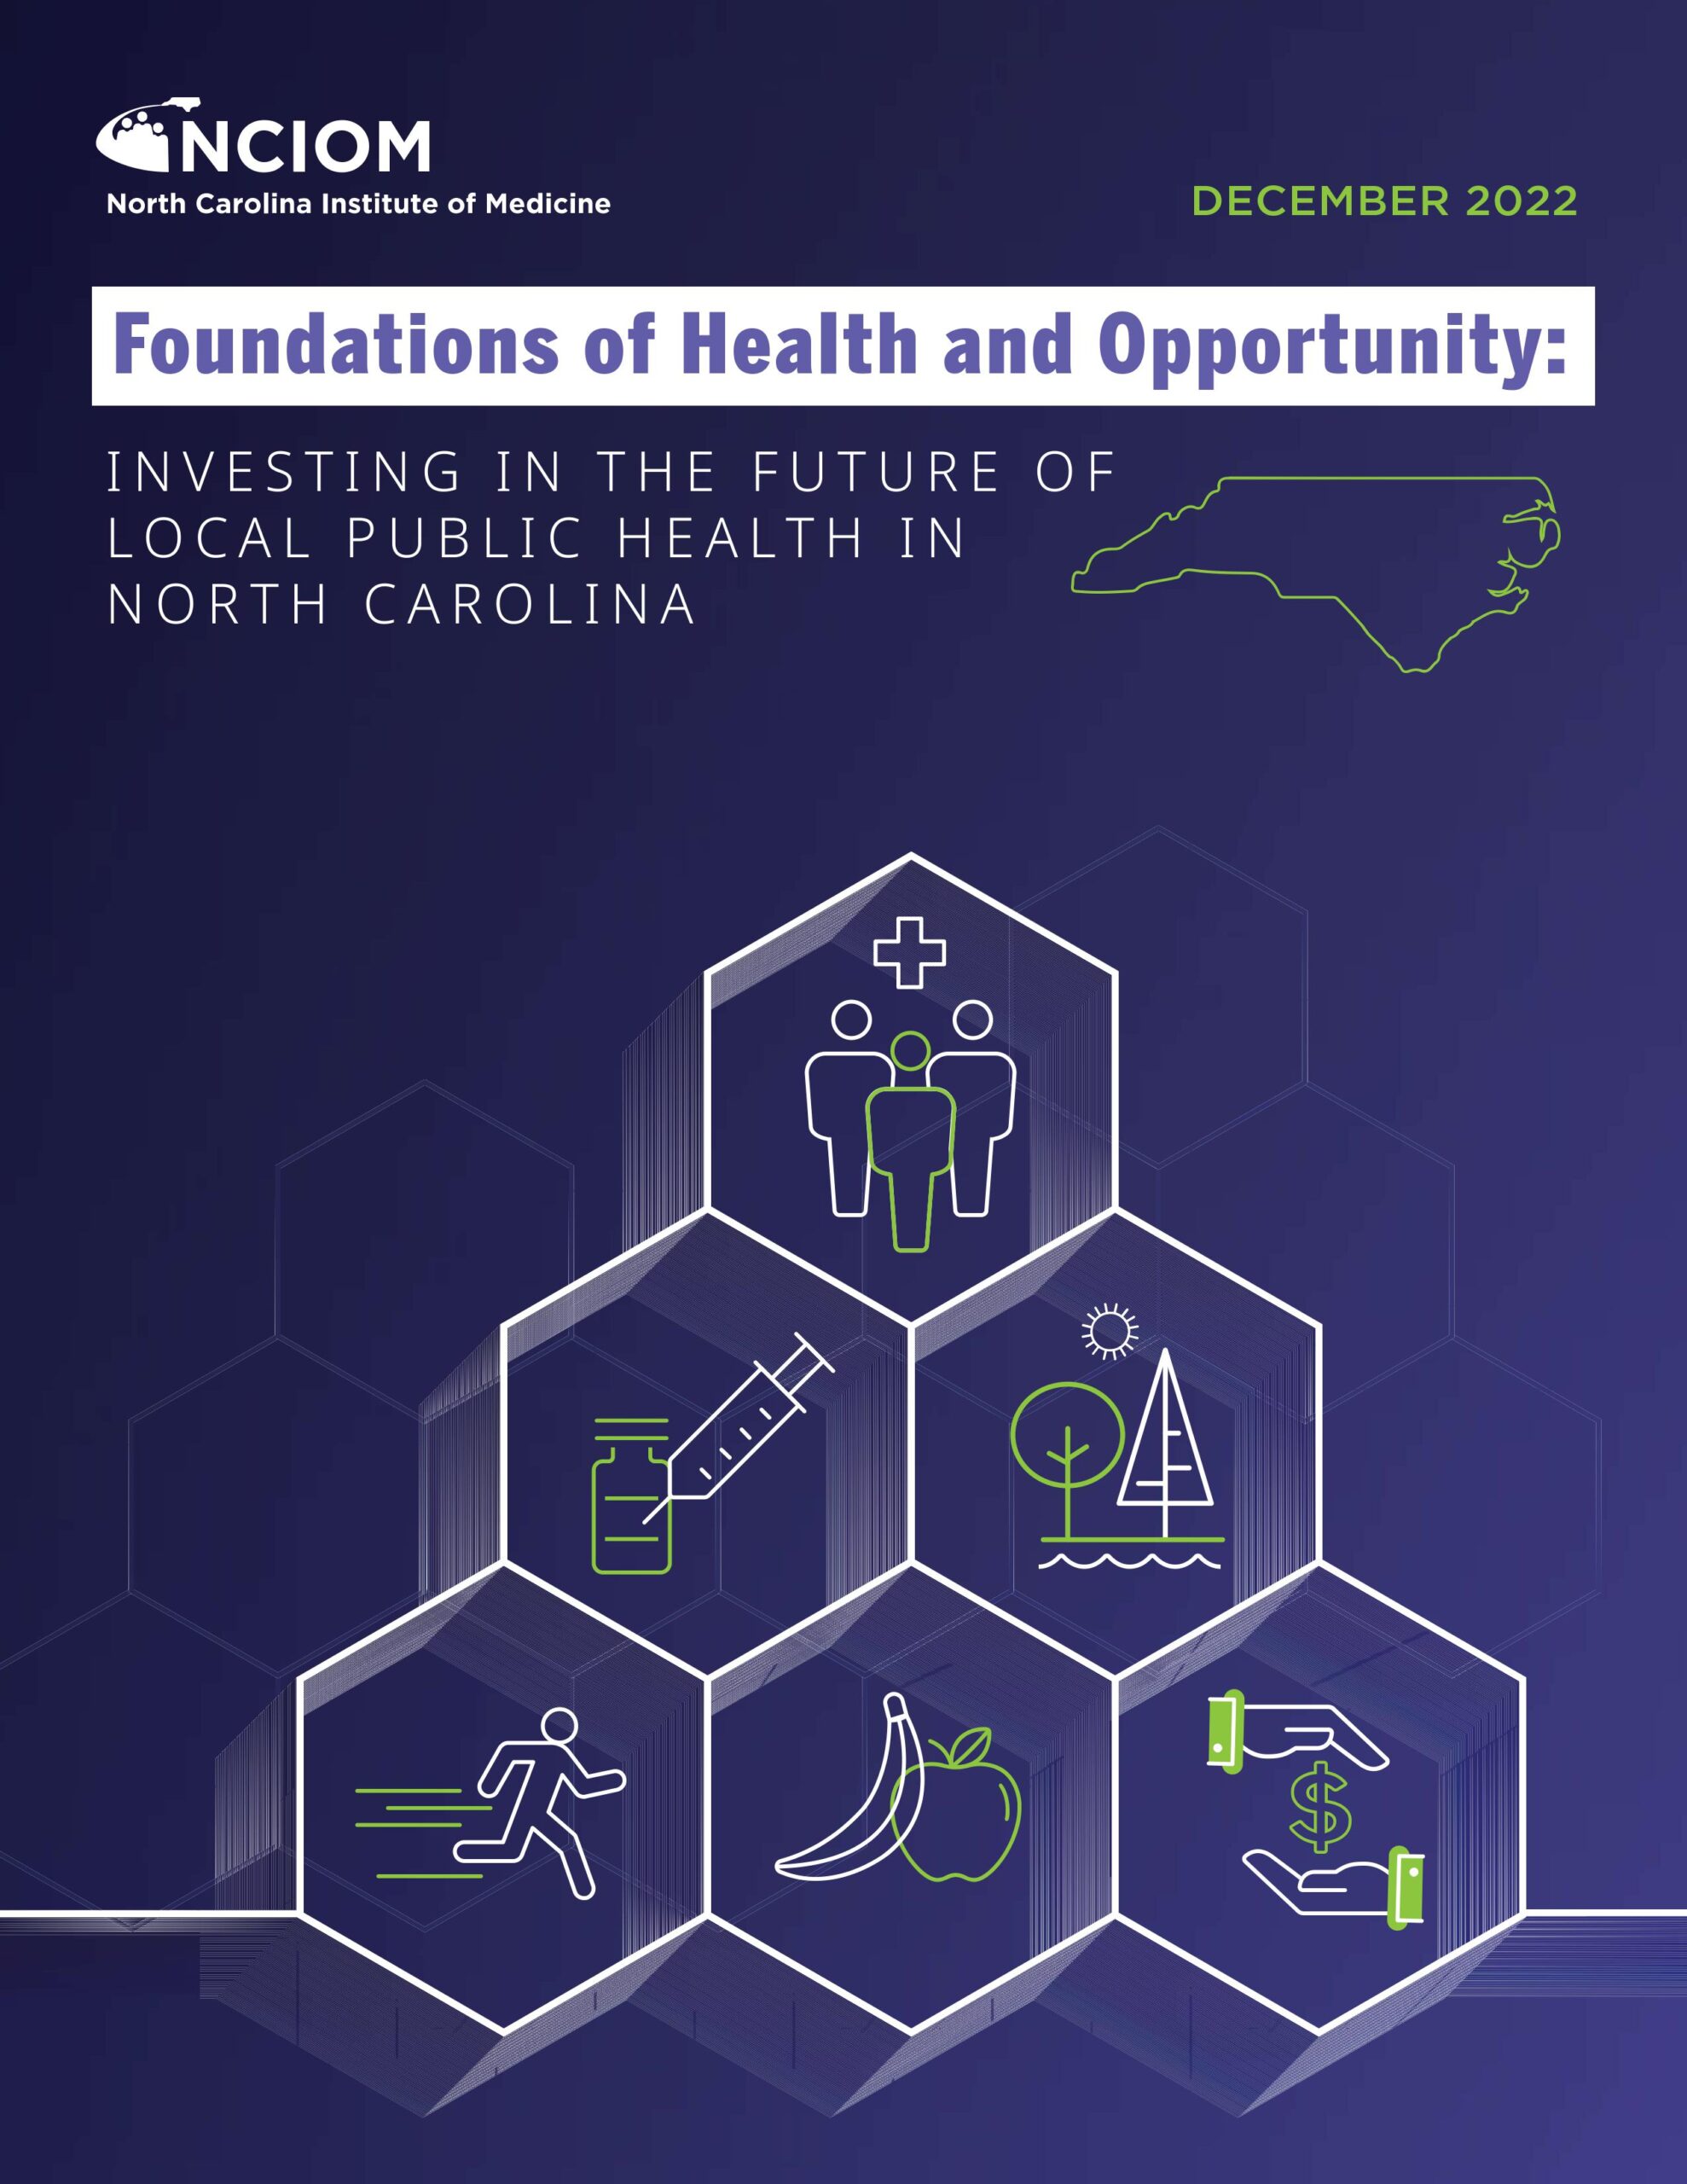 Foundations of Health and Opportunity: Investing in the Future of Local Public Health in North Carolina